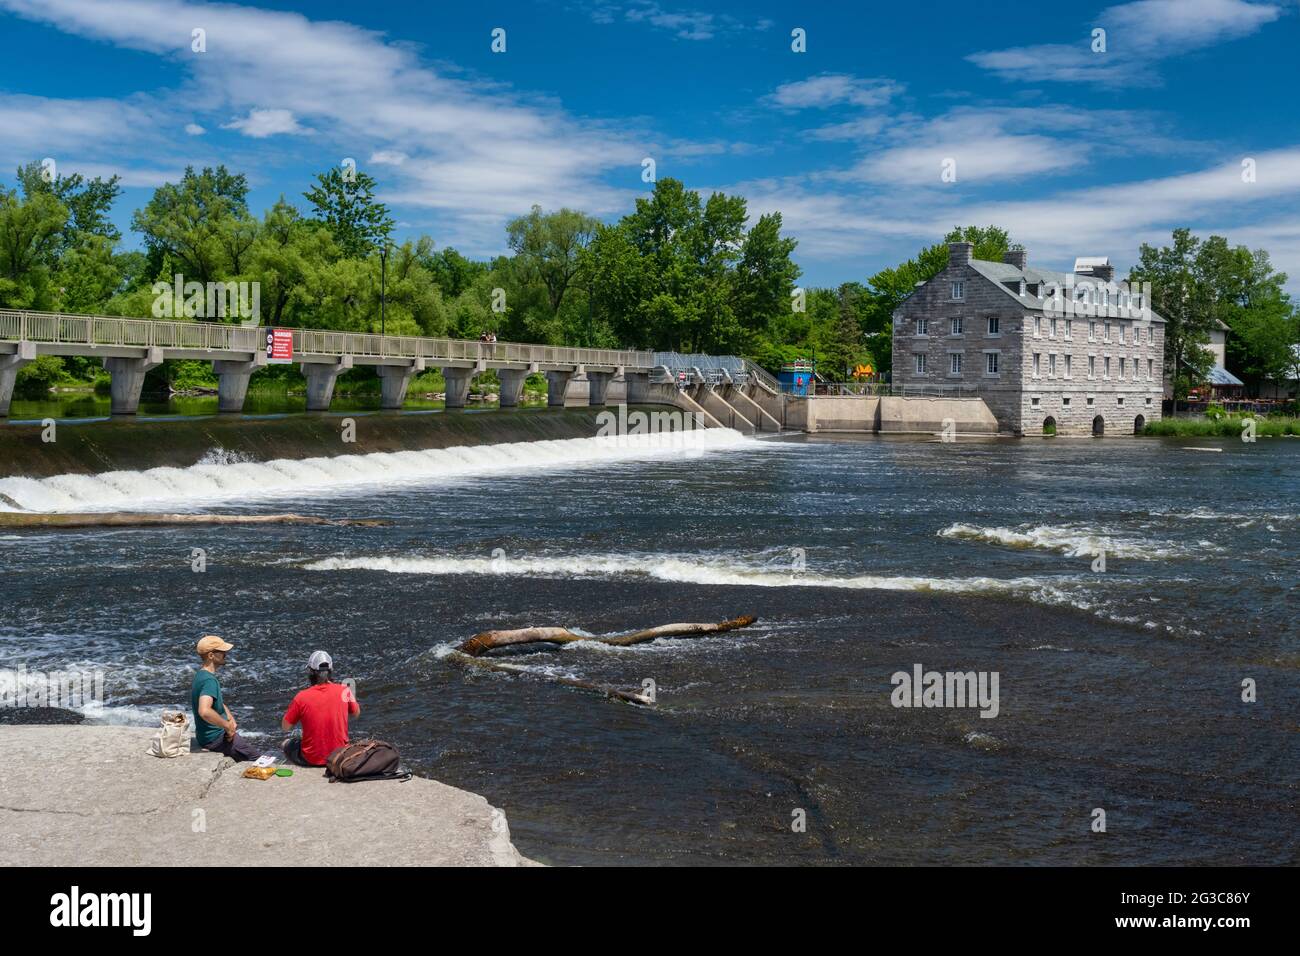 Terrebonne, Quebec, Canada - 11 June 2021: The Moulin neuf (New Mill) and Moulin-Neuf dam at the Île-des-moulins Stock Photo